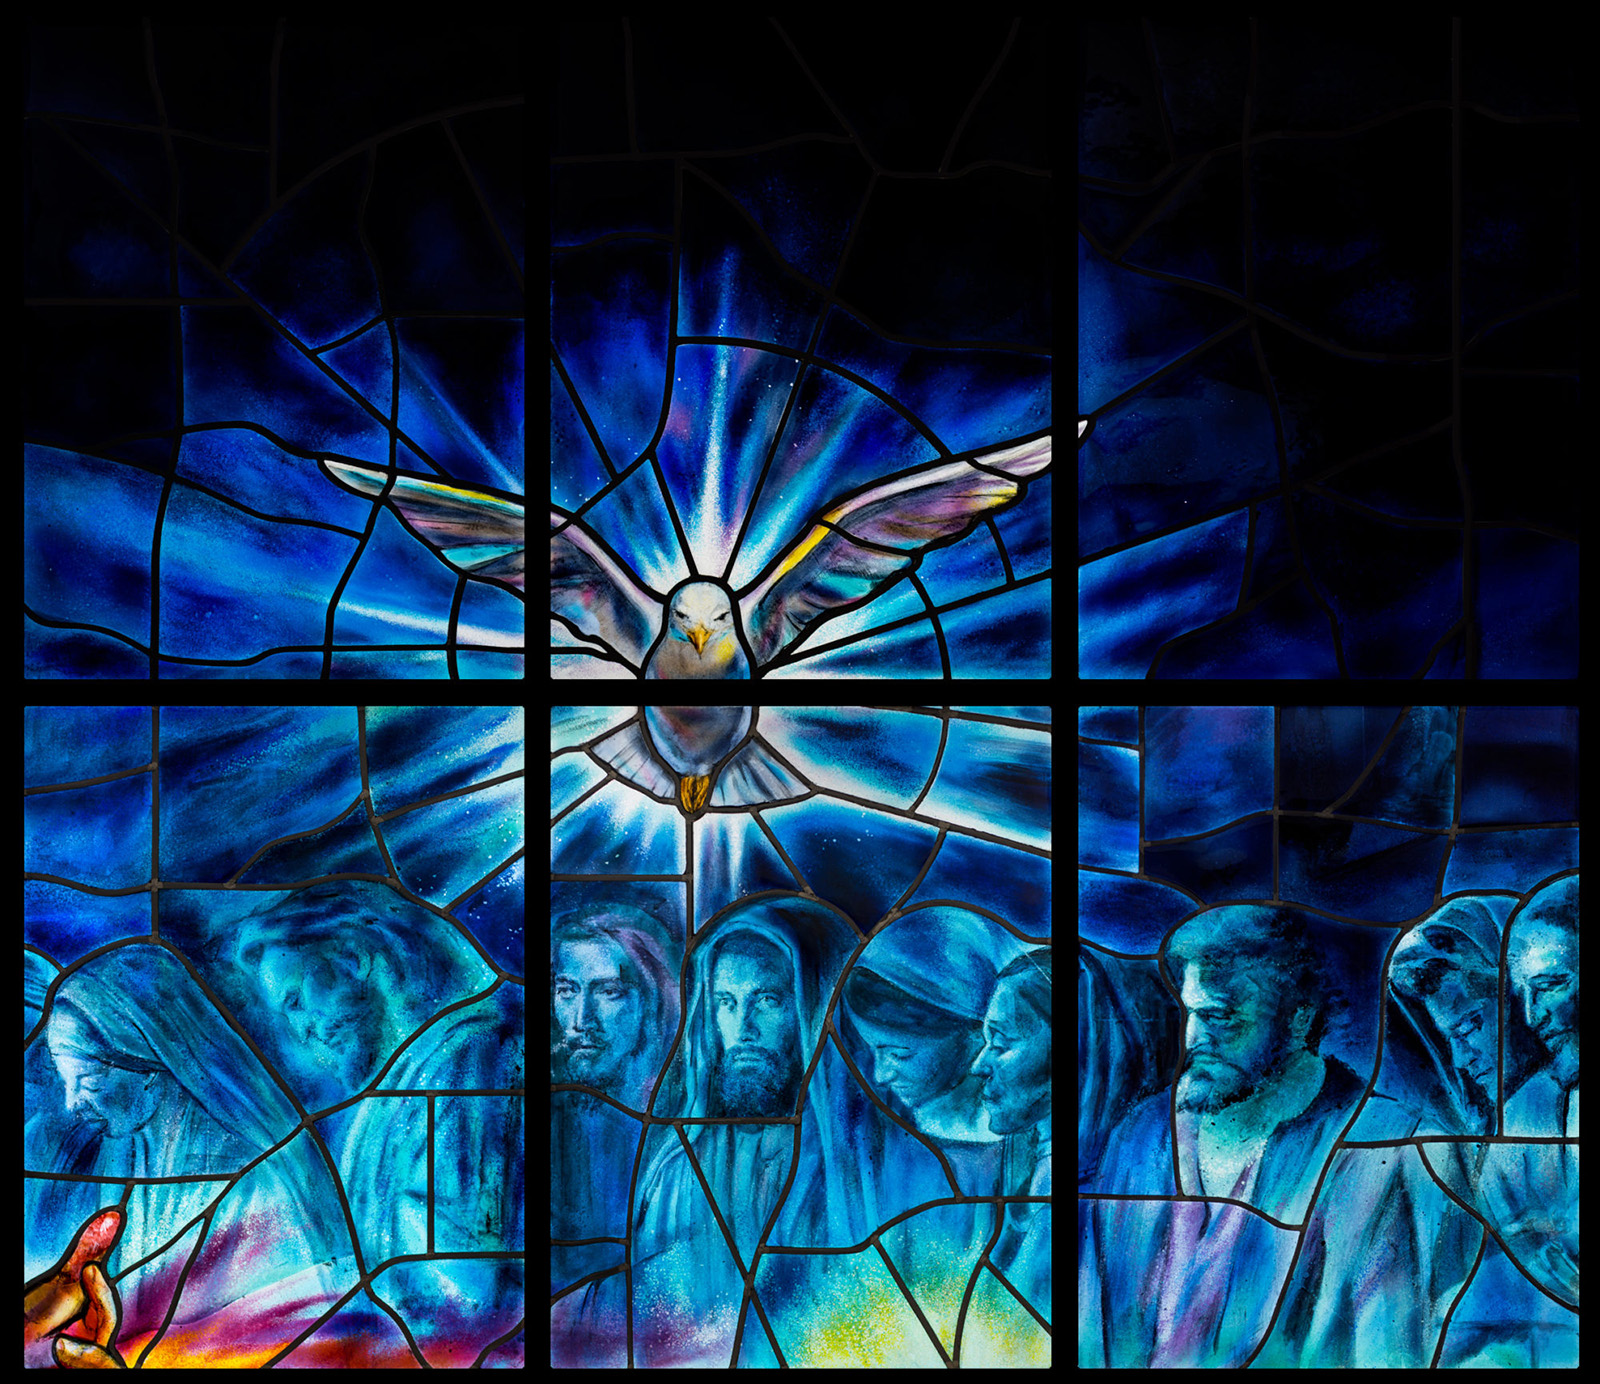 A dove and several panels of the stained-glass window at Church of the Resurrection in Leawood, Kansas. (Photo courtesy Judson Studios)